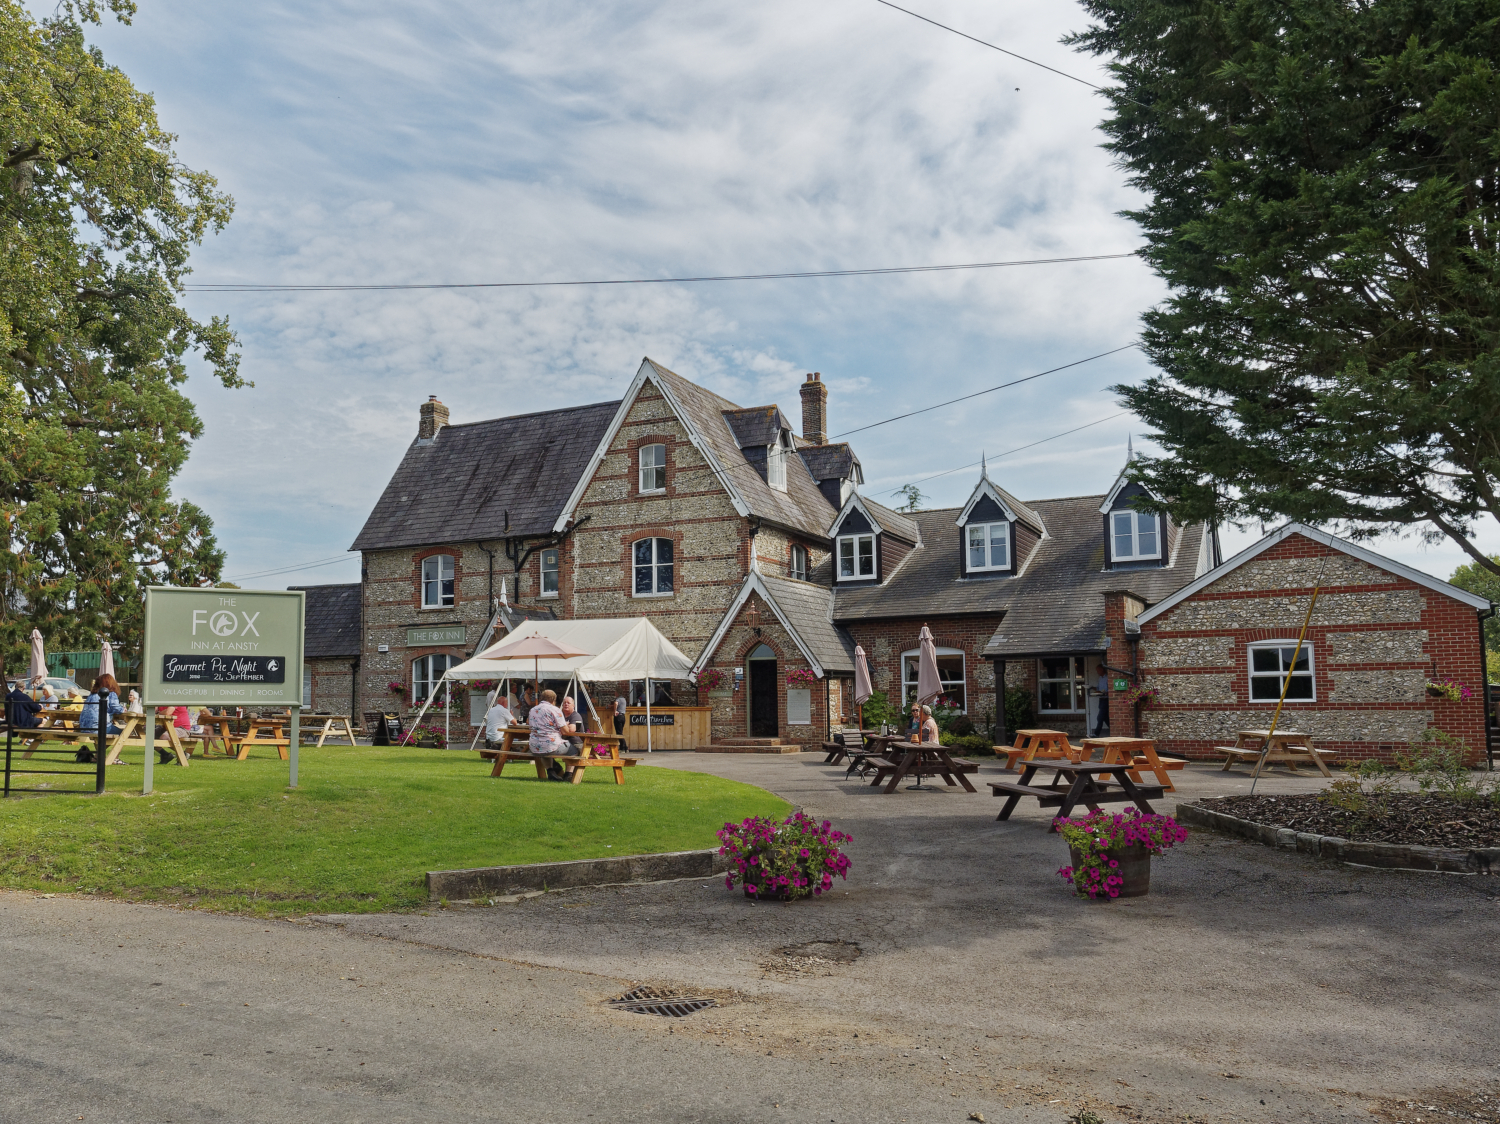 Pub Restaurant Review of The Fox Inn at Ansty